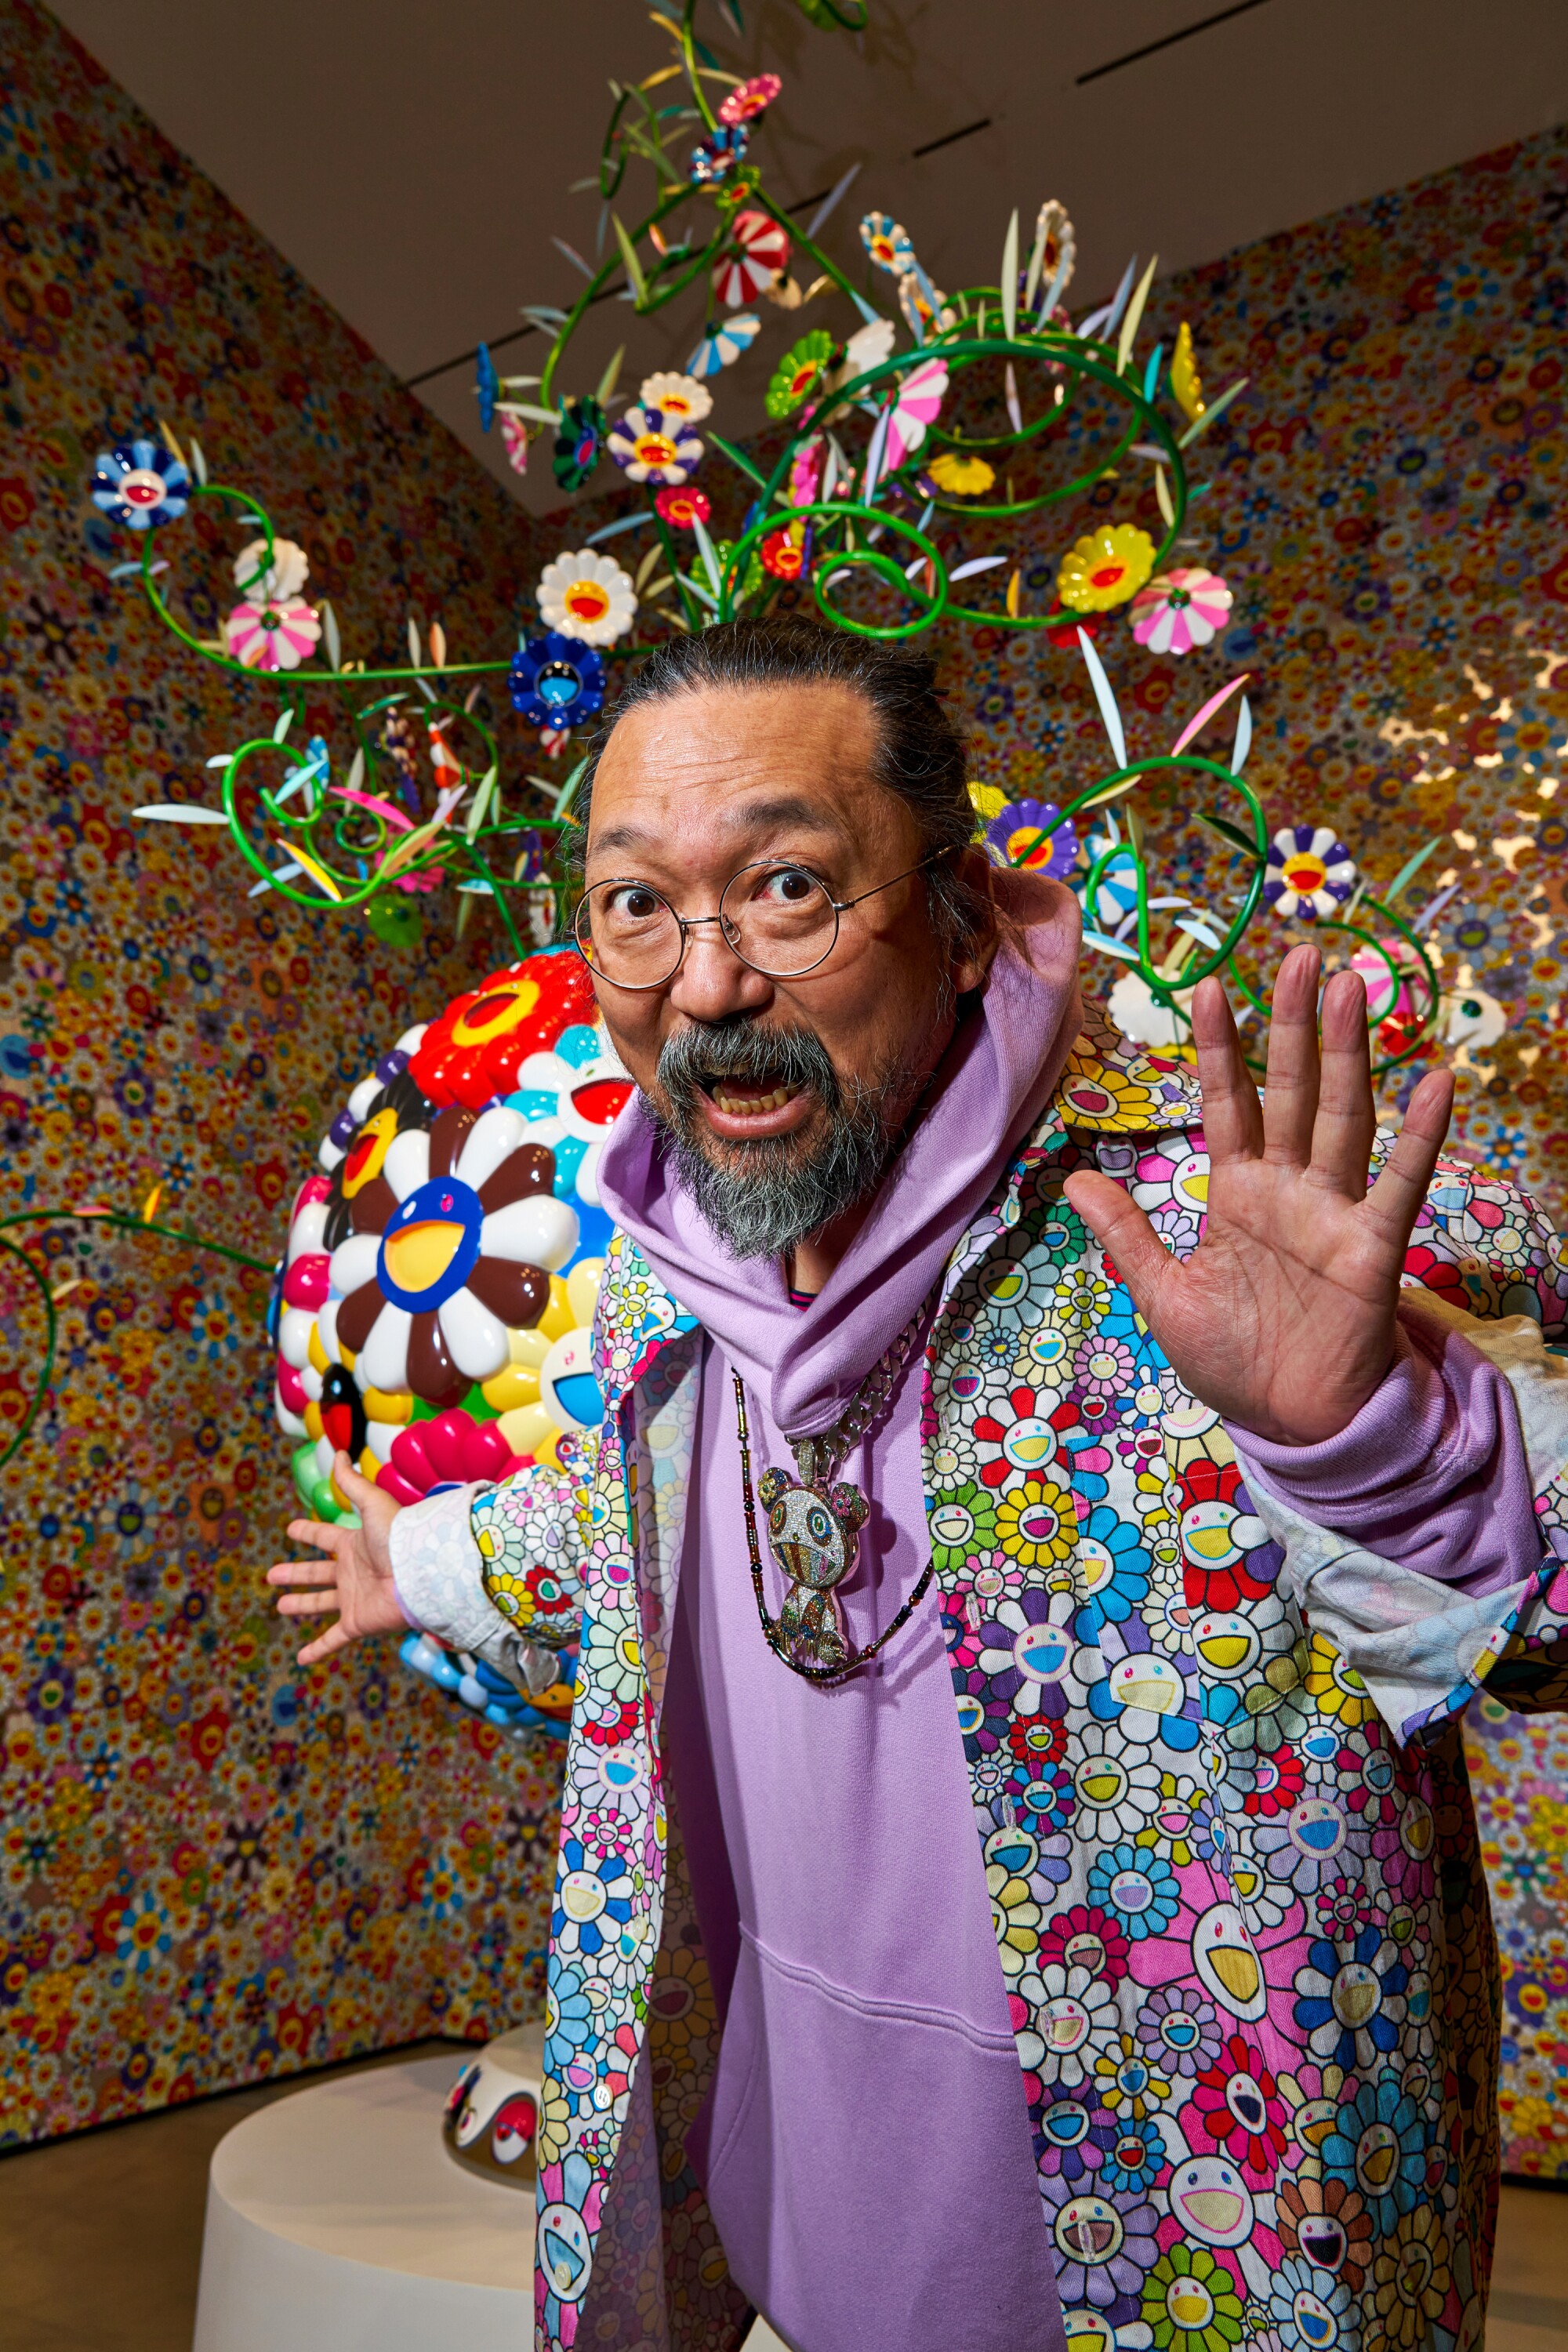 A man in colorful clothing poses in front of an art sculpture.